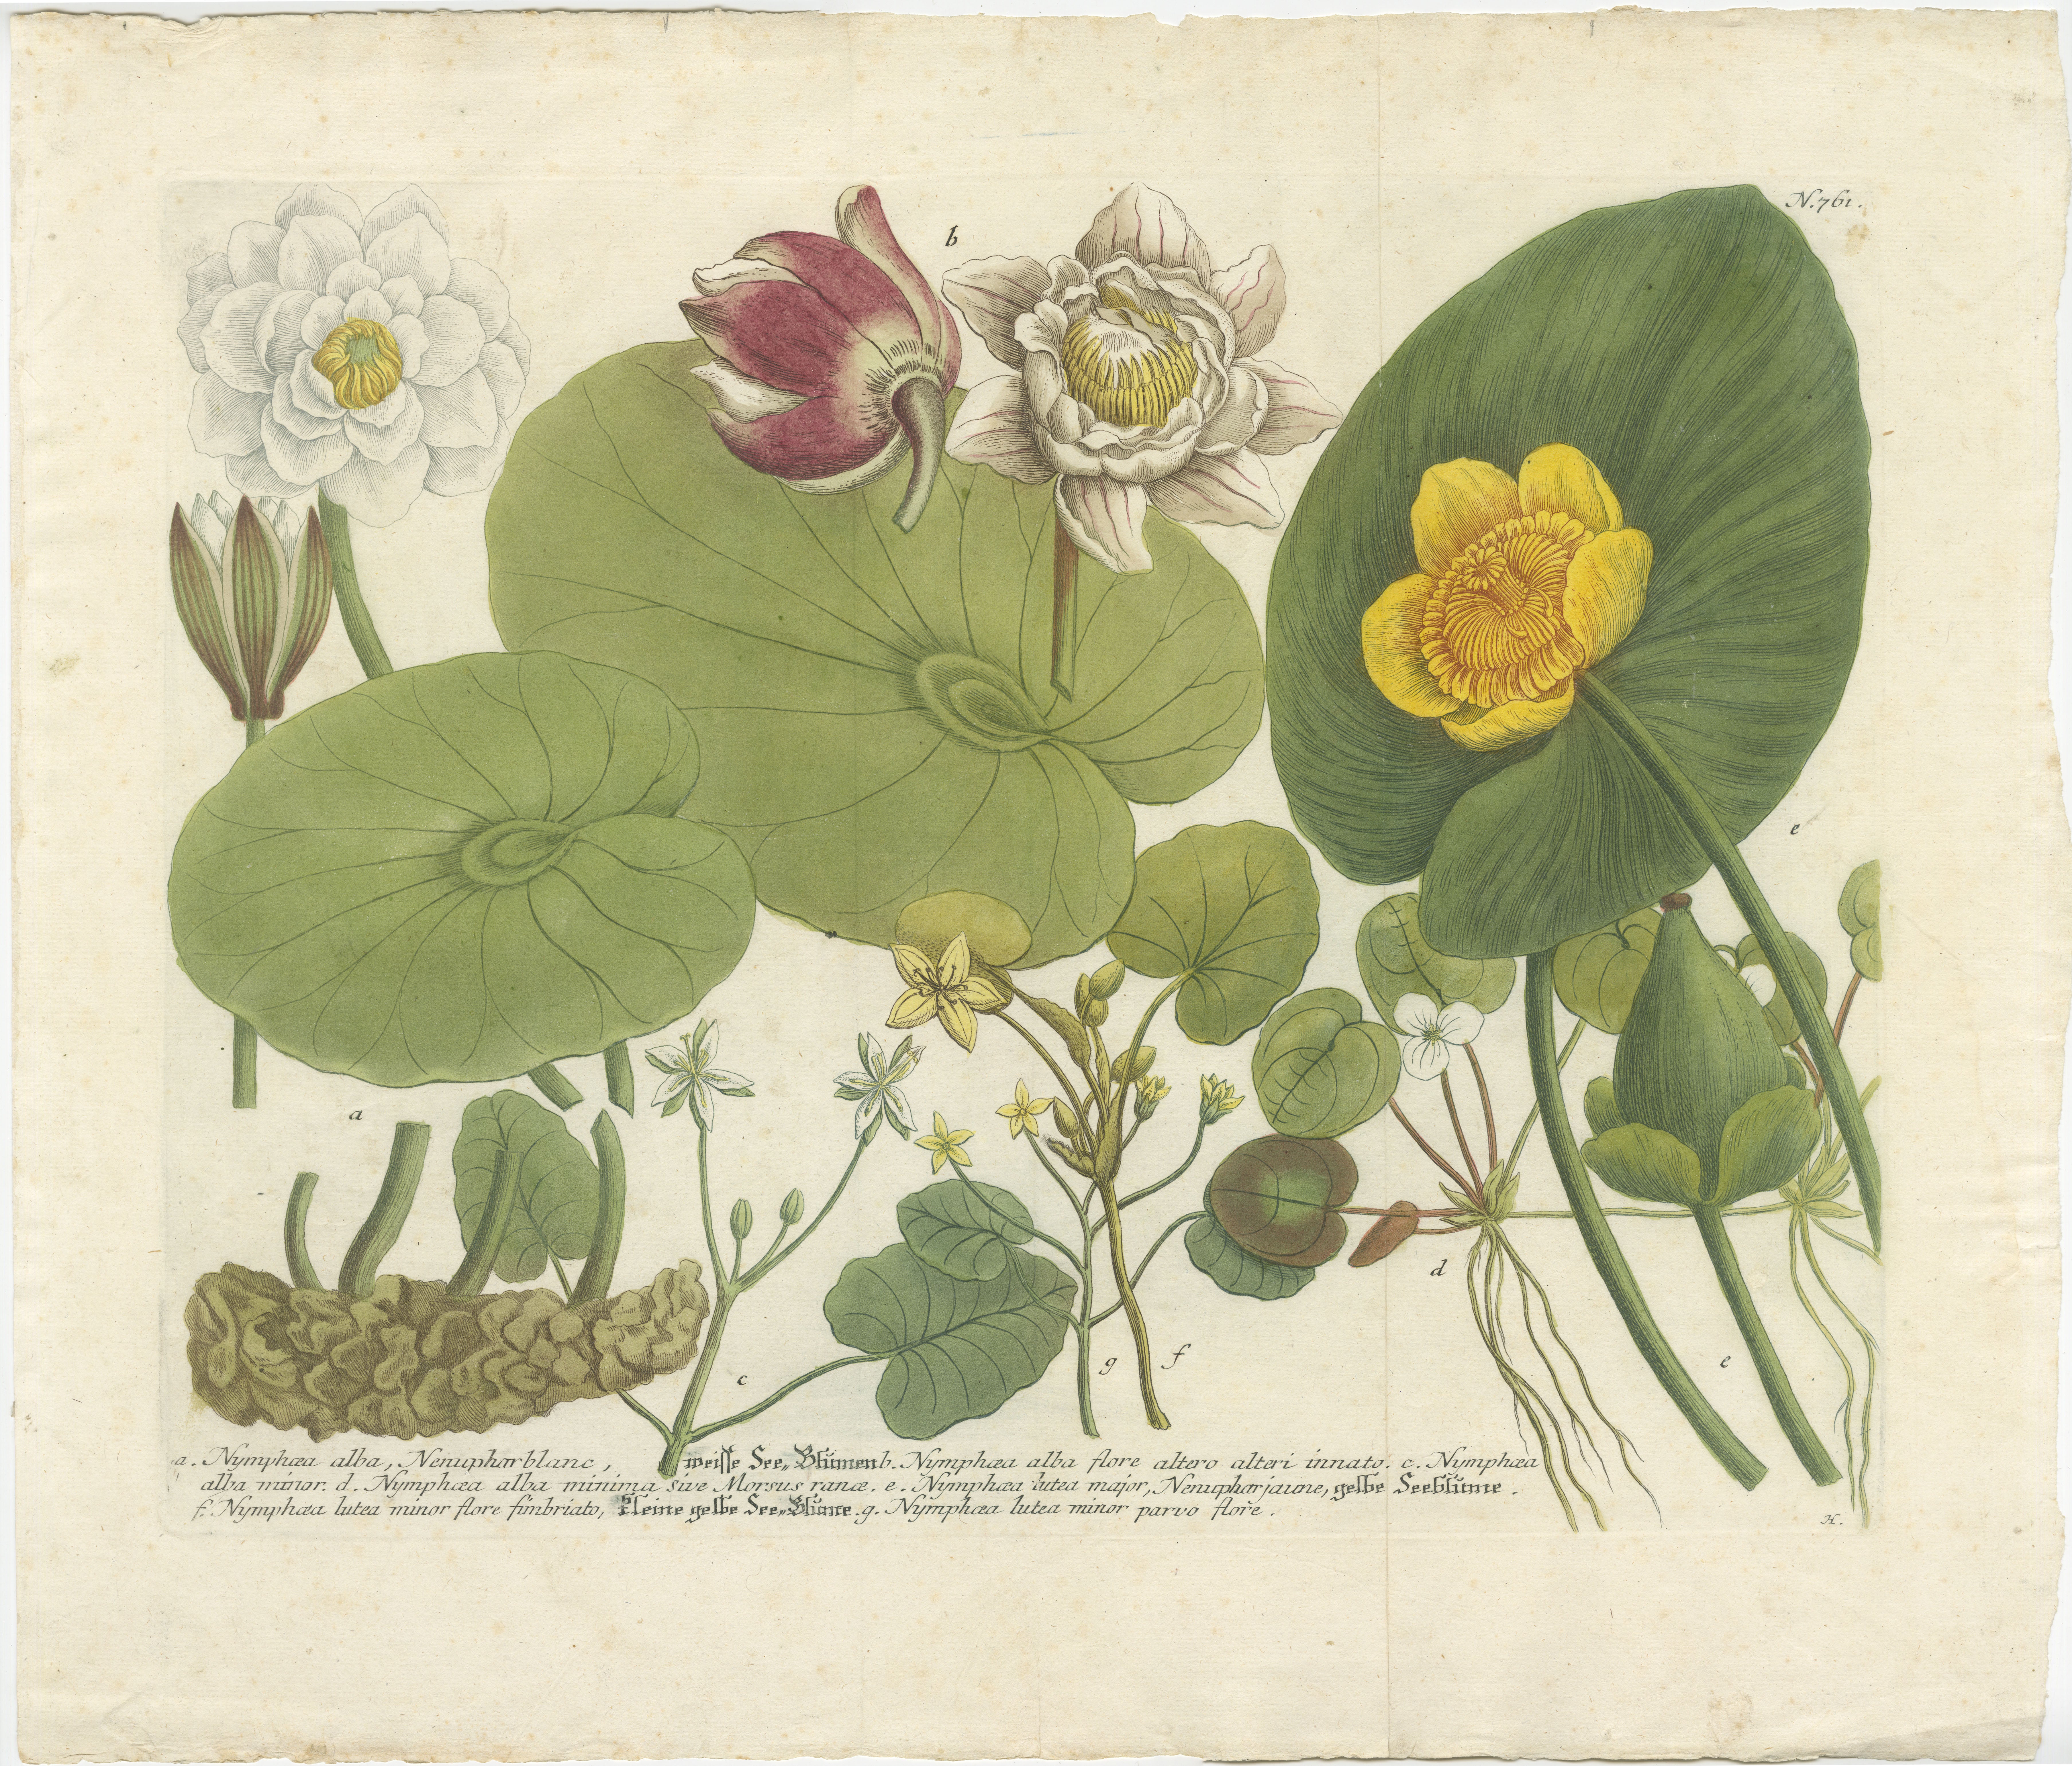 This image is an antique colored etching from a botanical work by J.W. Weinmann, titled 